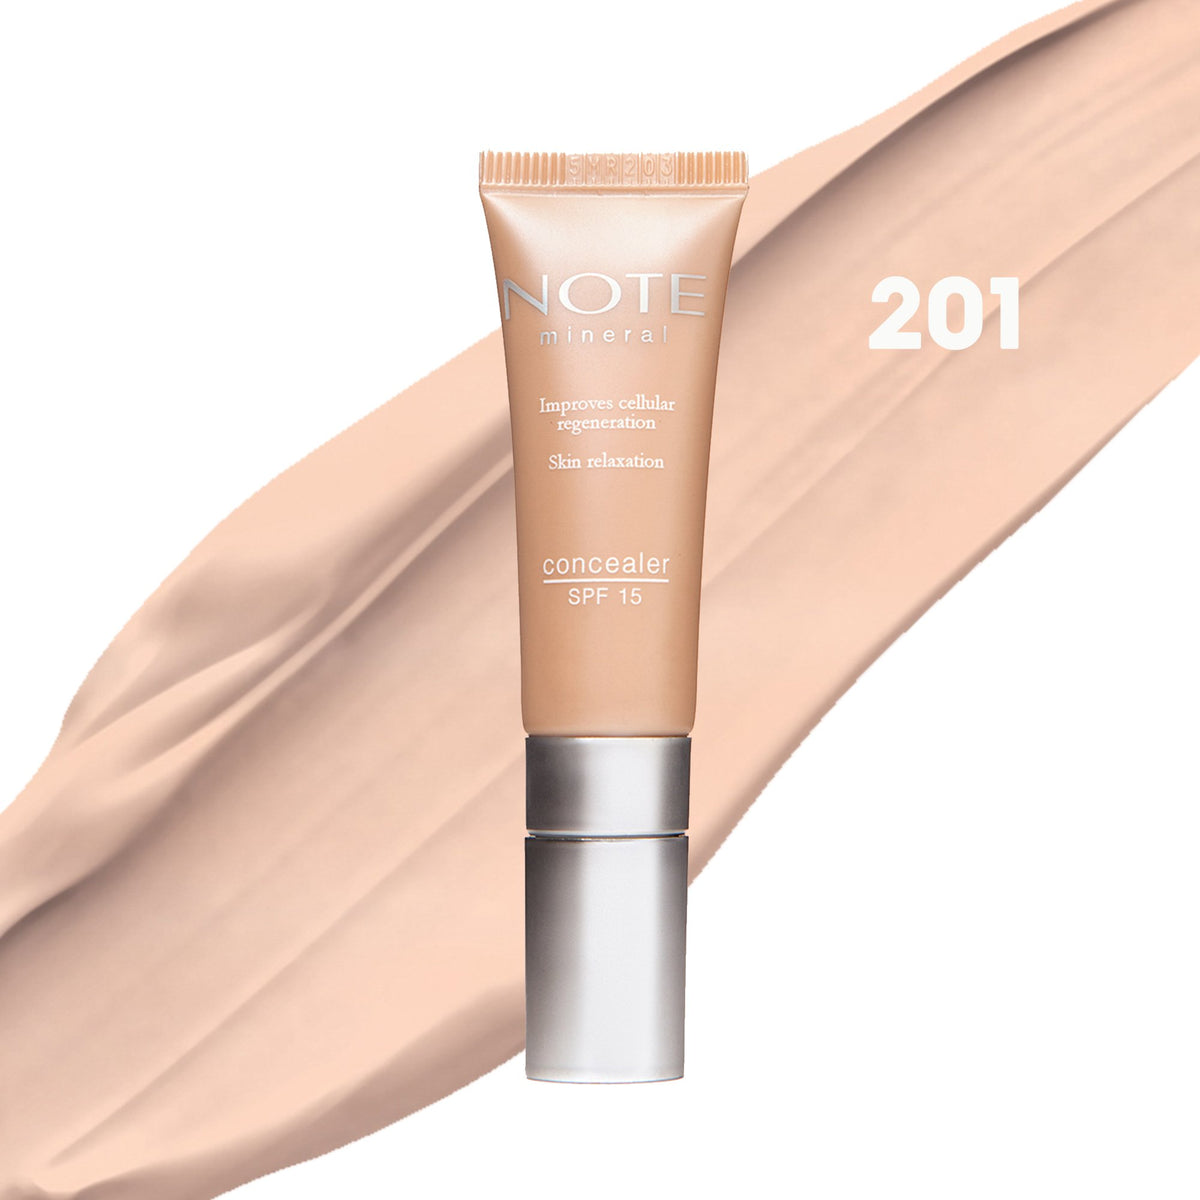 NOTE MINERAL CONCEALER - Halal Concealer, Cruelty Free Concealer, Vegan Concealer, Paraben Free Concealer, Long Lasting, Full Coverage, Lightweight, Crease Proof, Complexion Perfecting